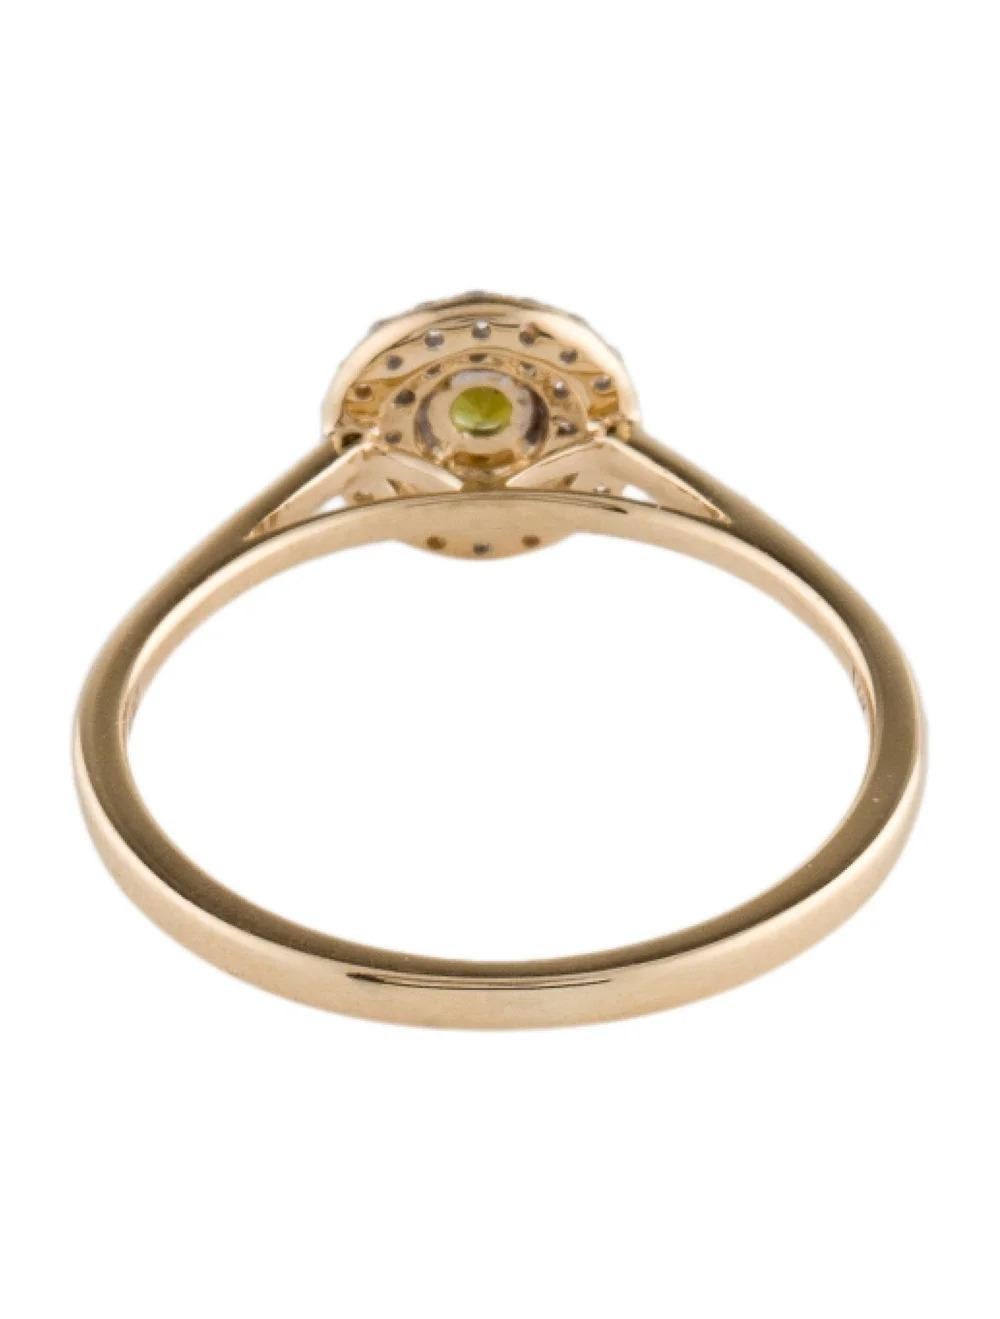 14K Tourmaline & Diamond Cocktail Ring, Size 6.5 - Green Gemstone Fine Jewelry In New Condition For Sale In Holtsville, NY